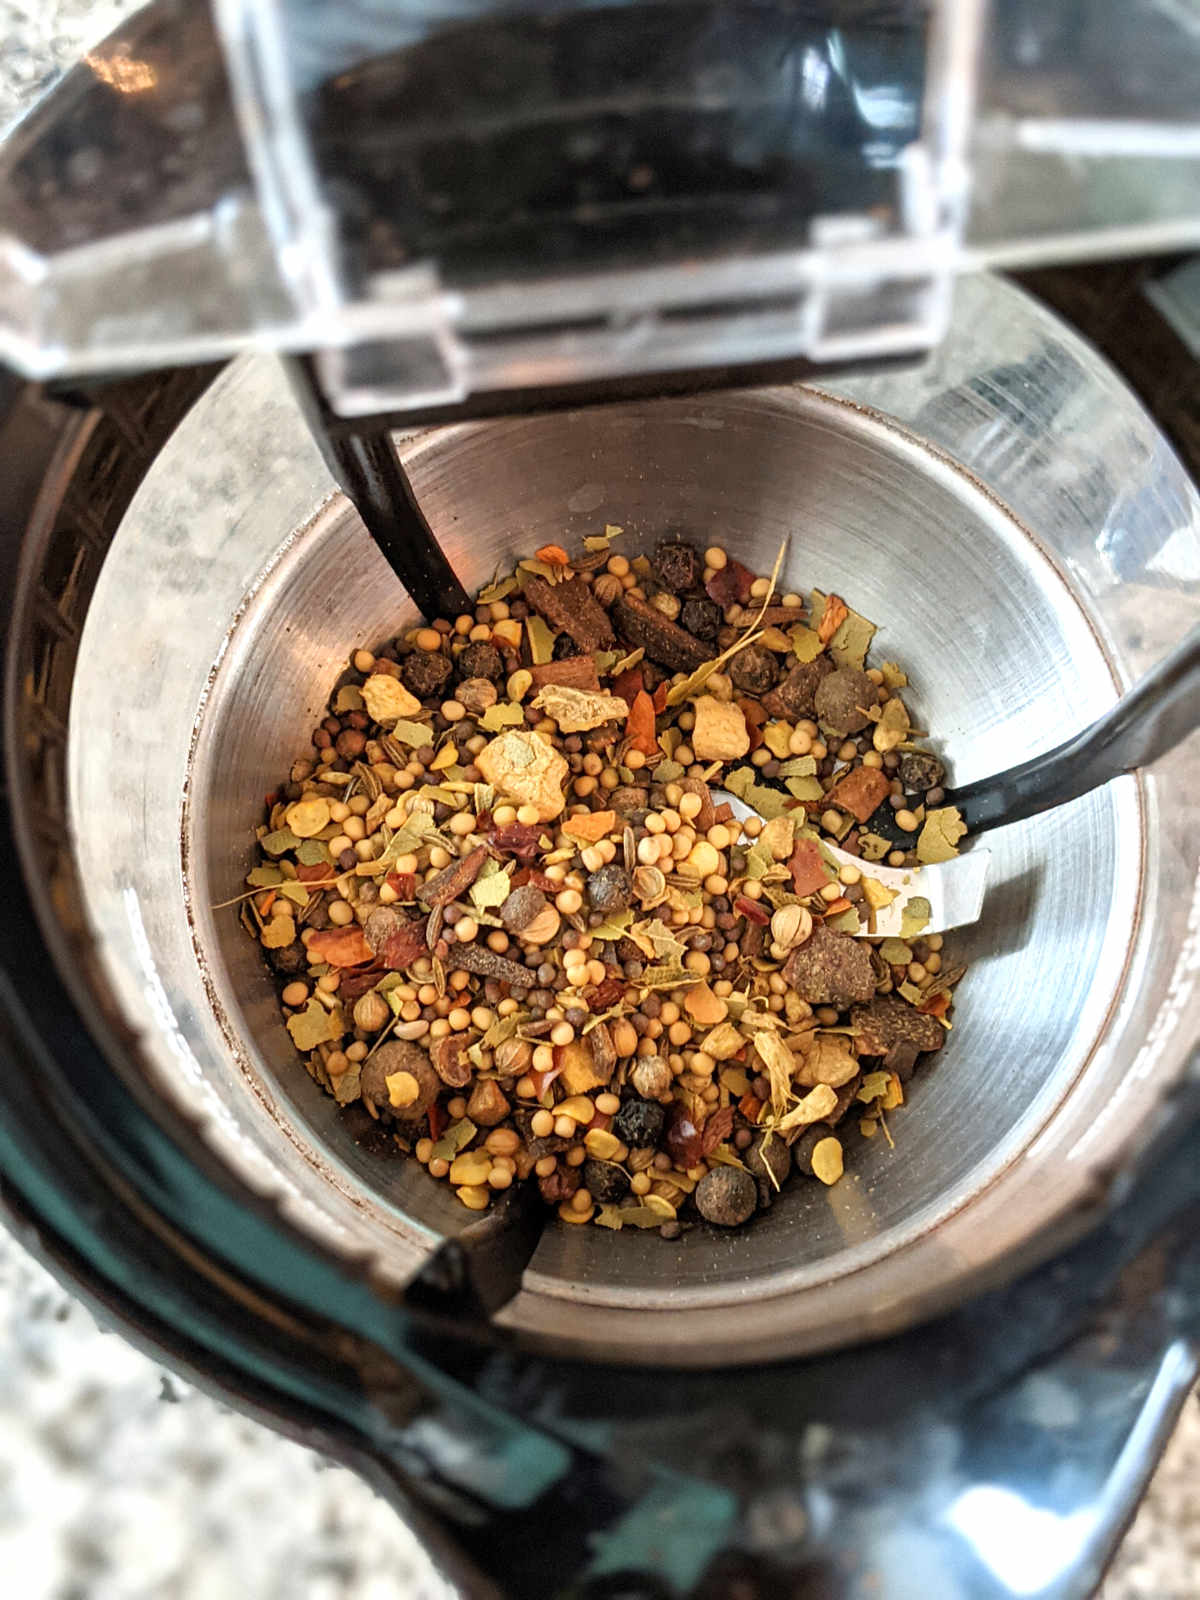 Pickling spice in a spice grinder.